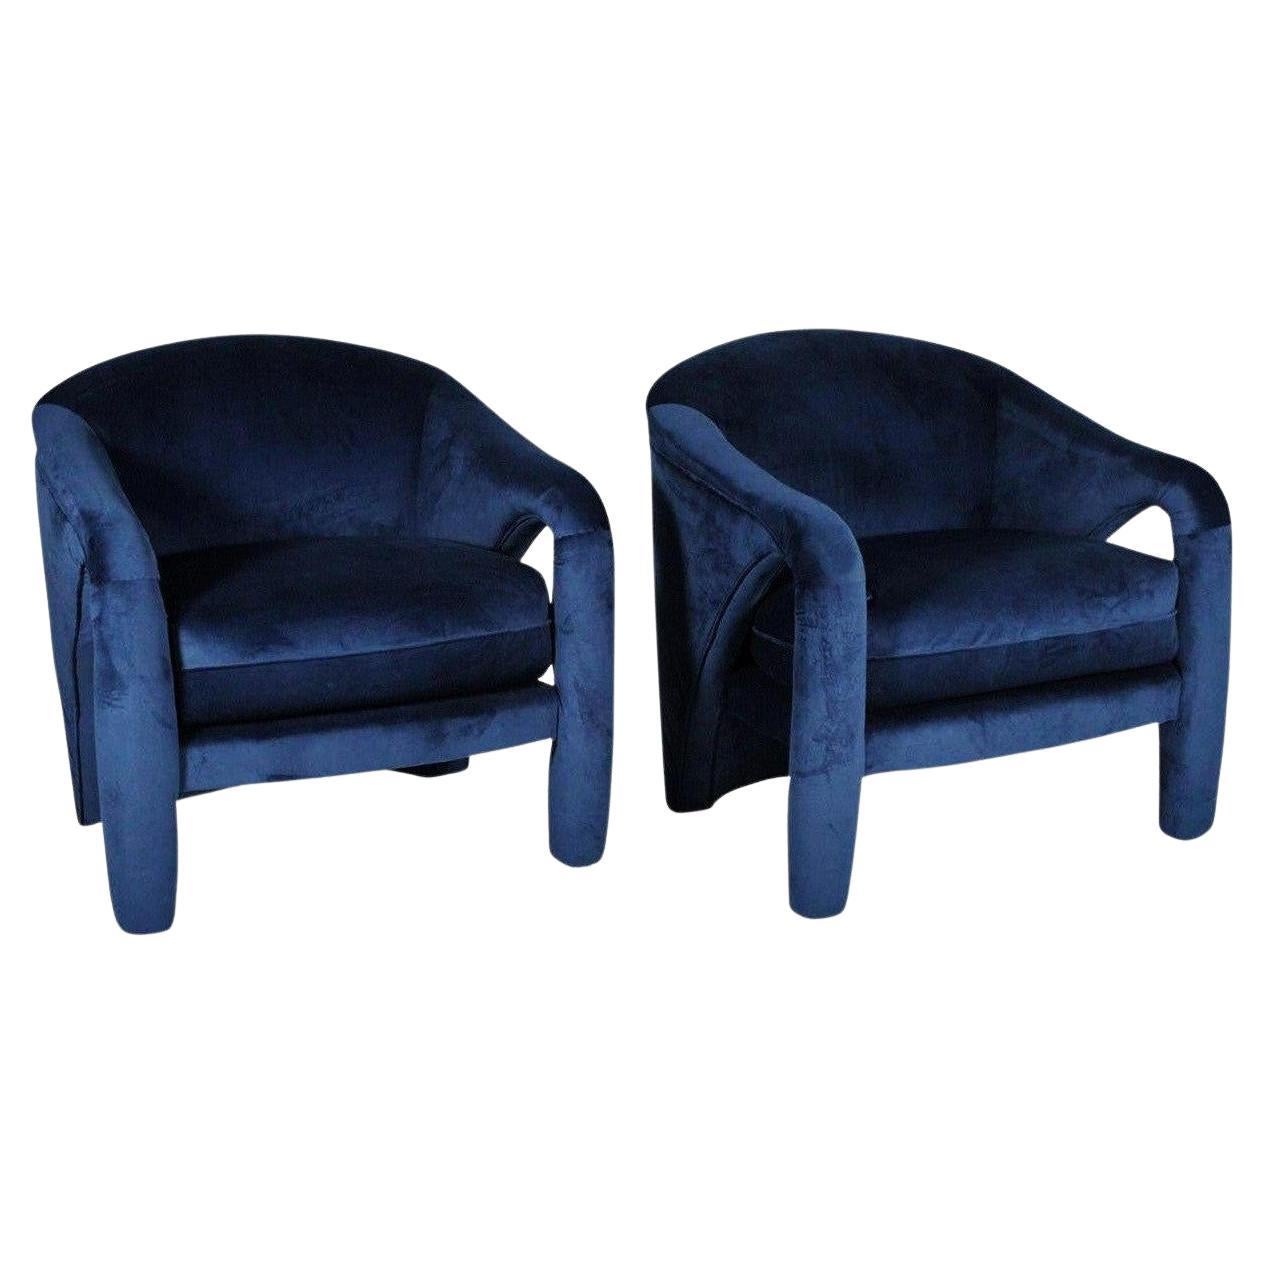 Vladimir Kaganesque Navy Blue Lounge Chairs by Weiman For Sale